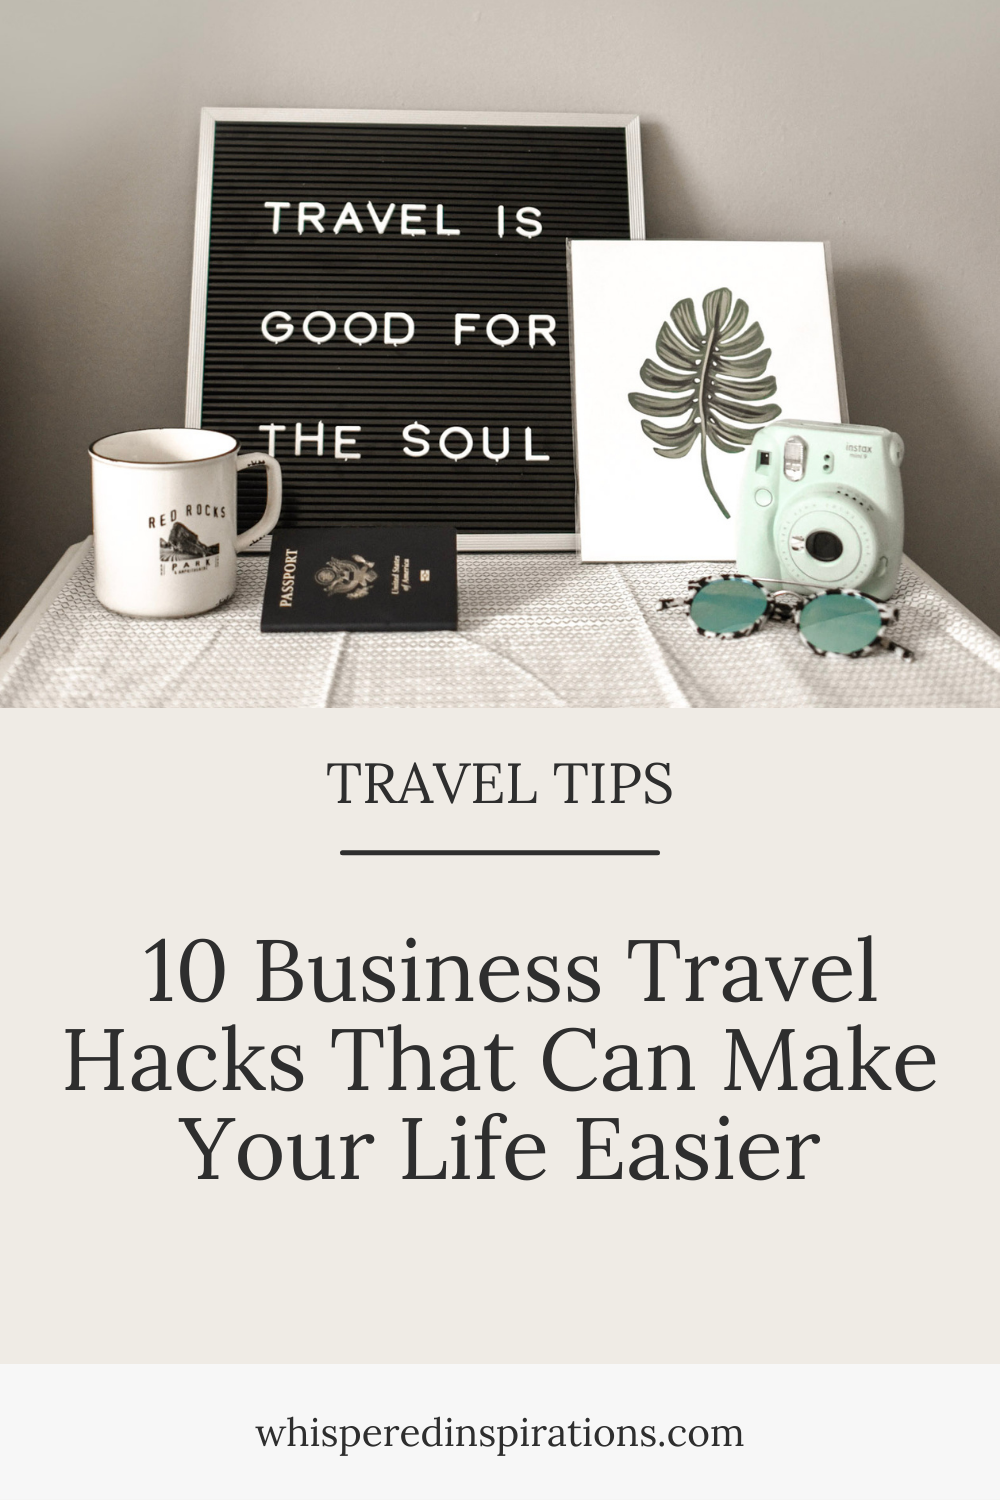 Traveling for business isn't always fun. If you try these travel business hacks, you'll have an easier time and make the most of your trip.